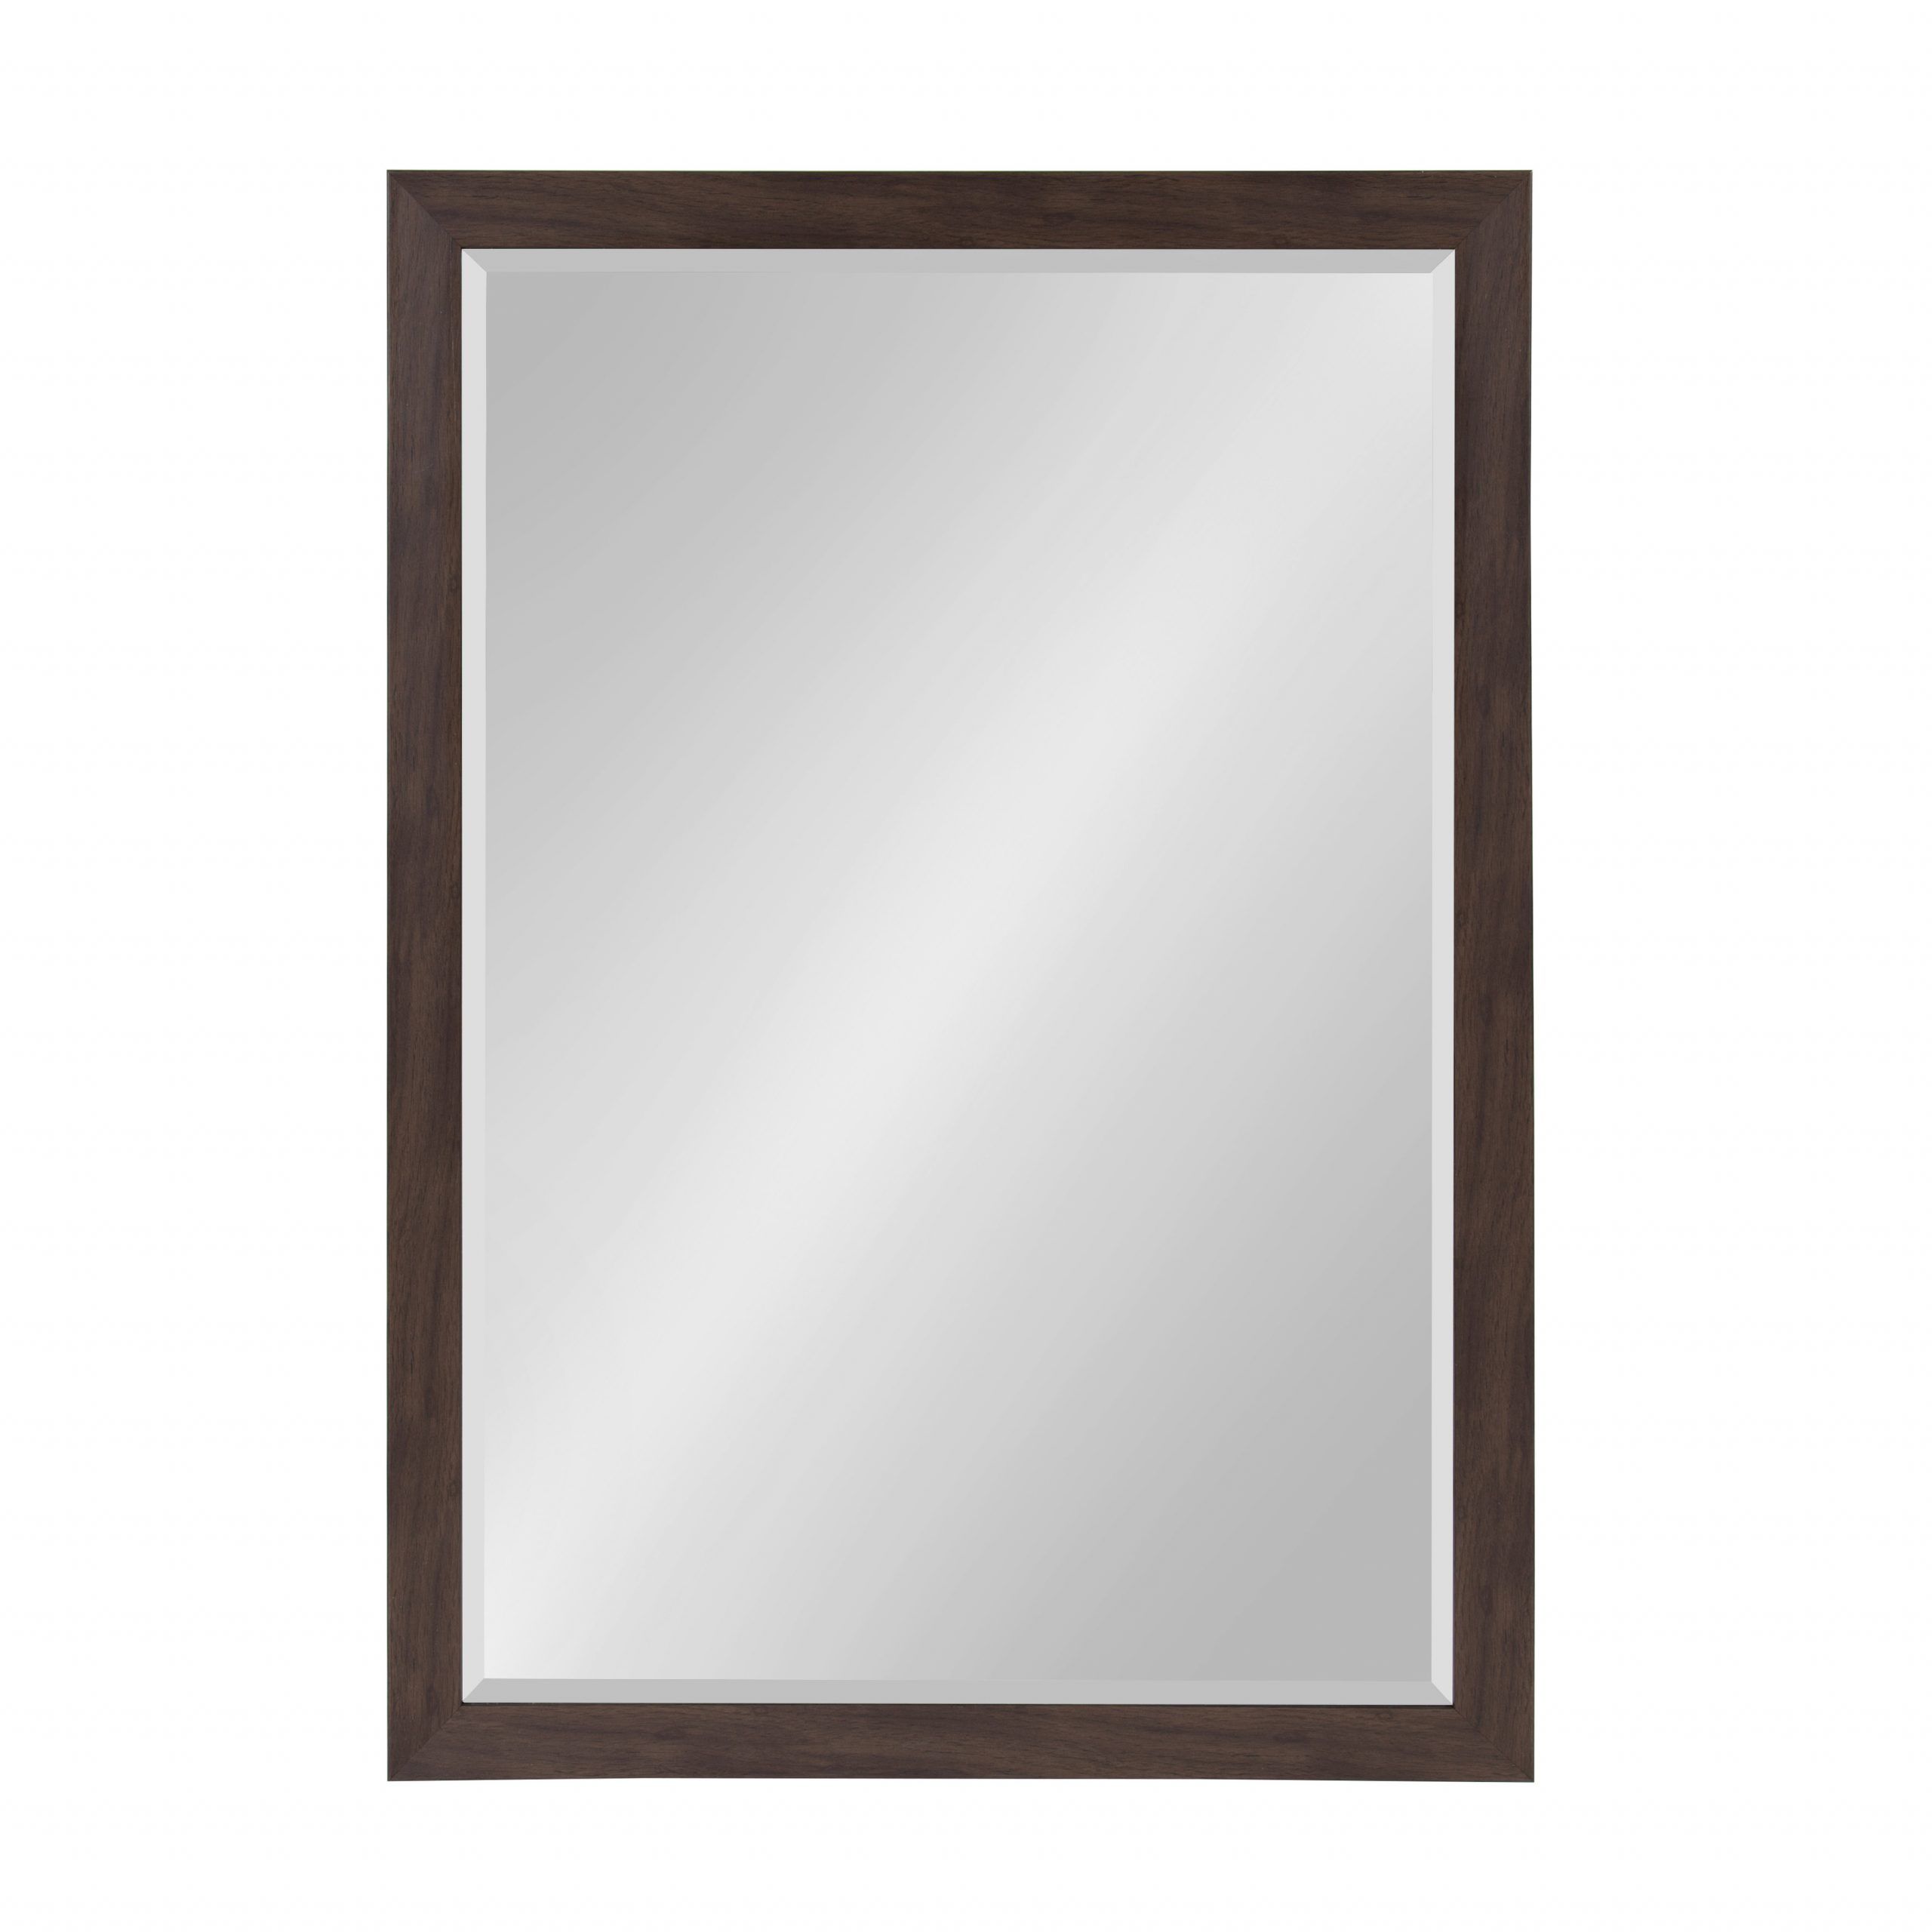 Designovation – Beatrice Framed Decorative Rectangle Wall Mirror, 27 X Within Rectangular Chevron Edge Wall Mirrors (View 1 of 15)